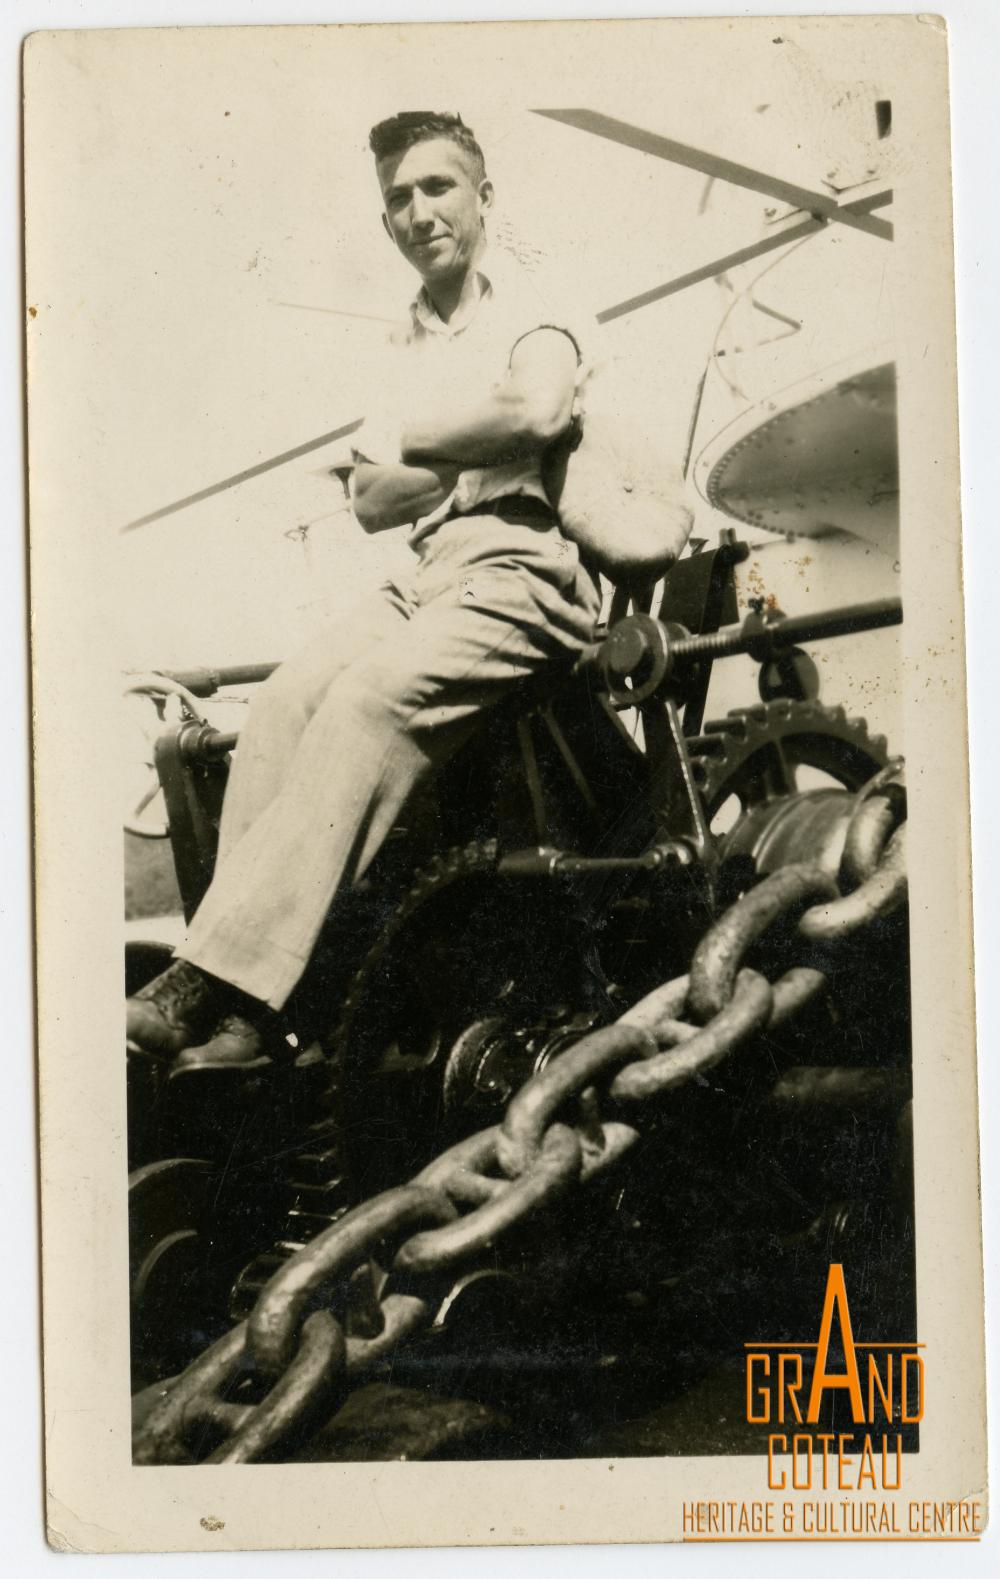 Photographic Print, unidentified man sitting on anchor hoist of a ship.